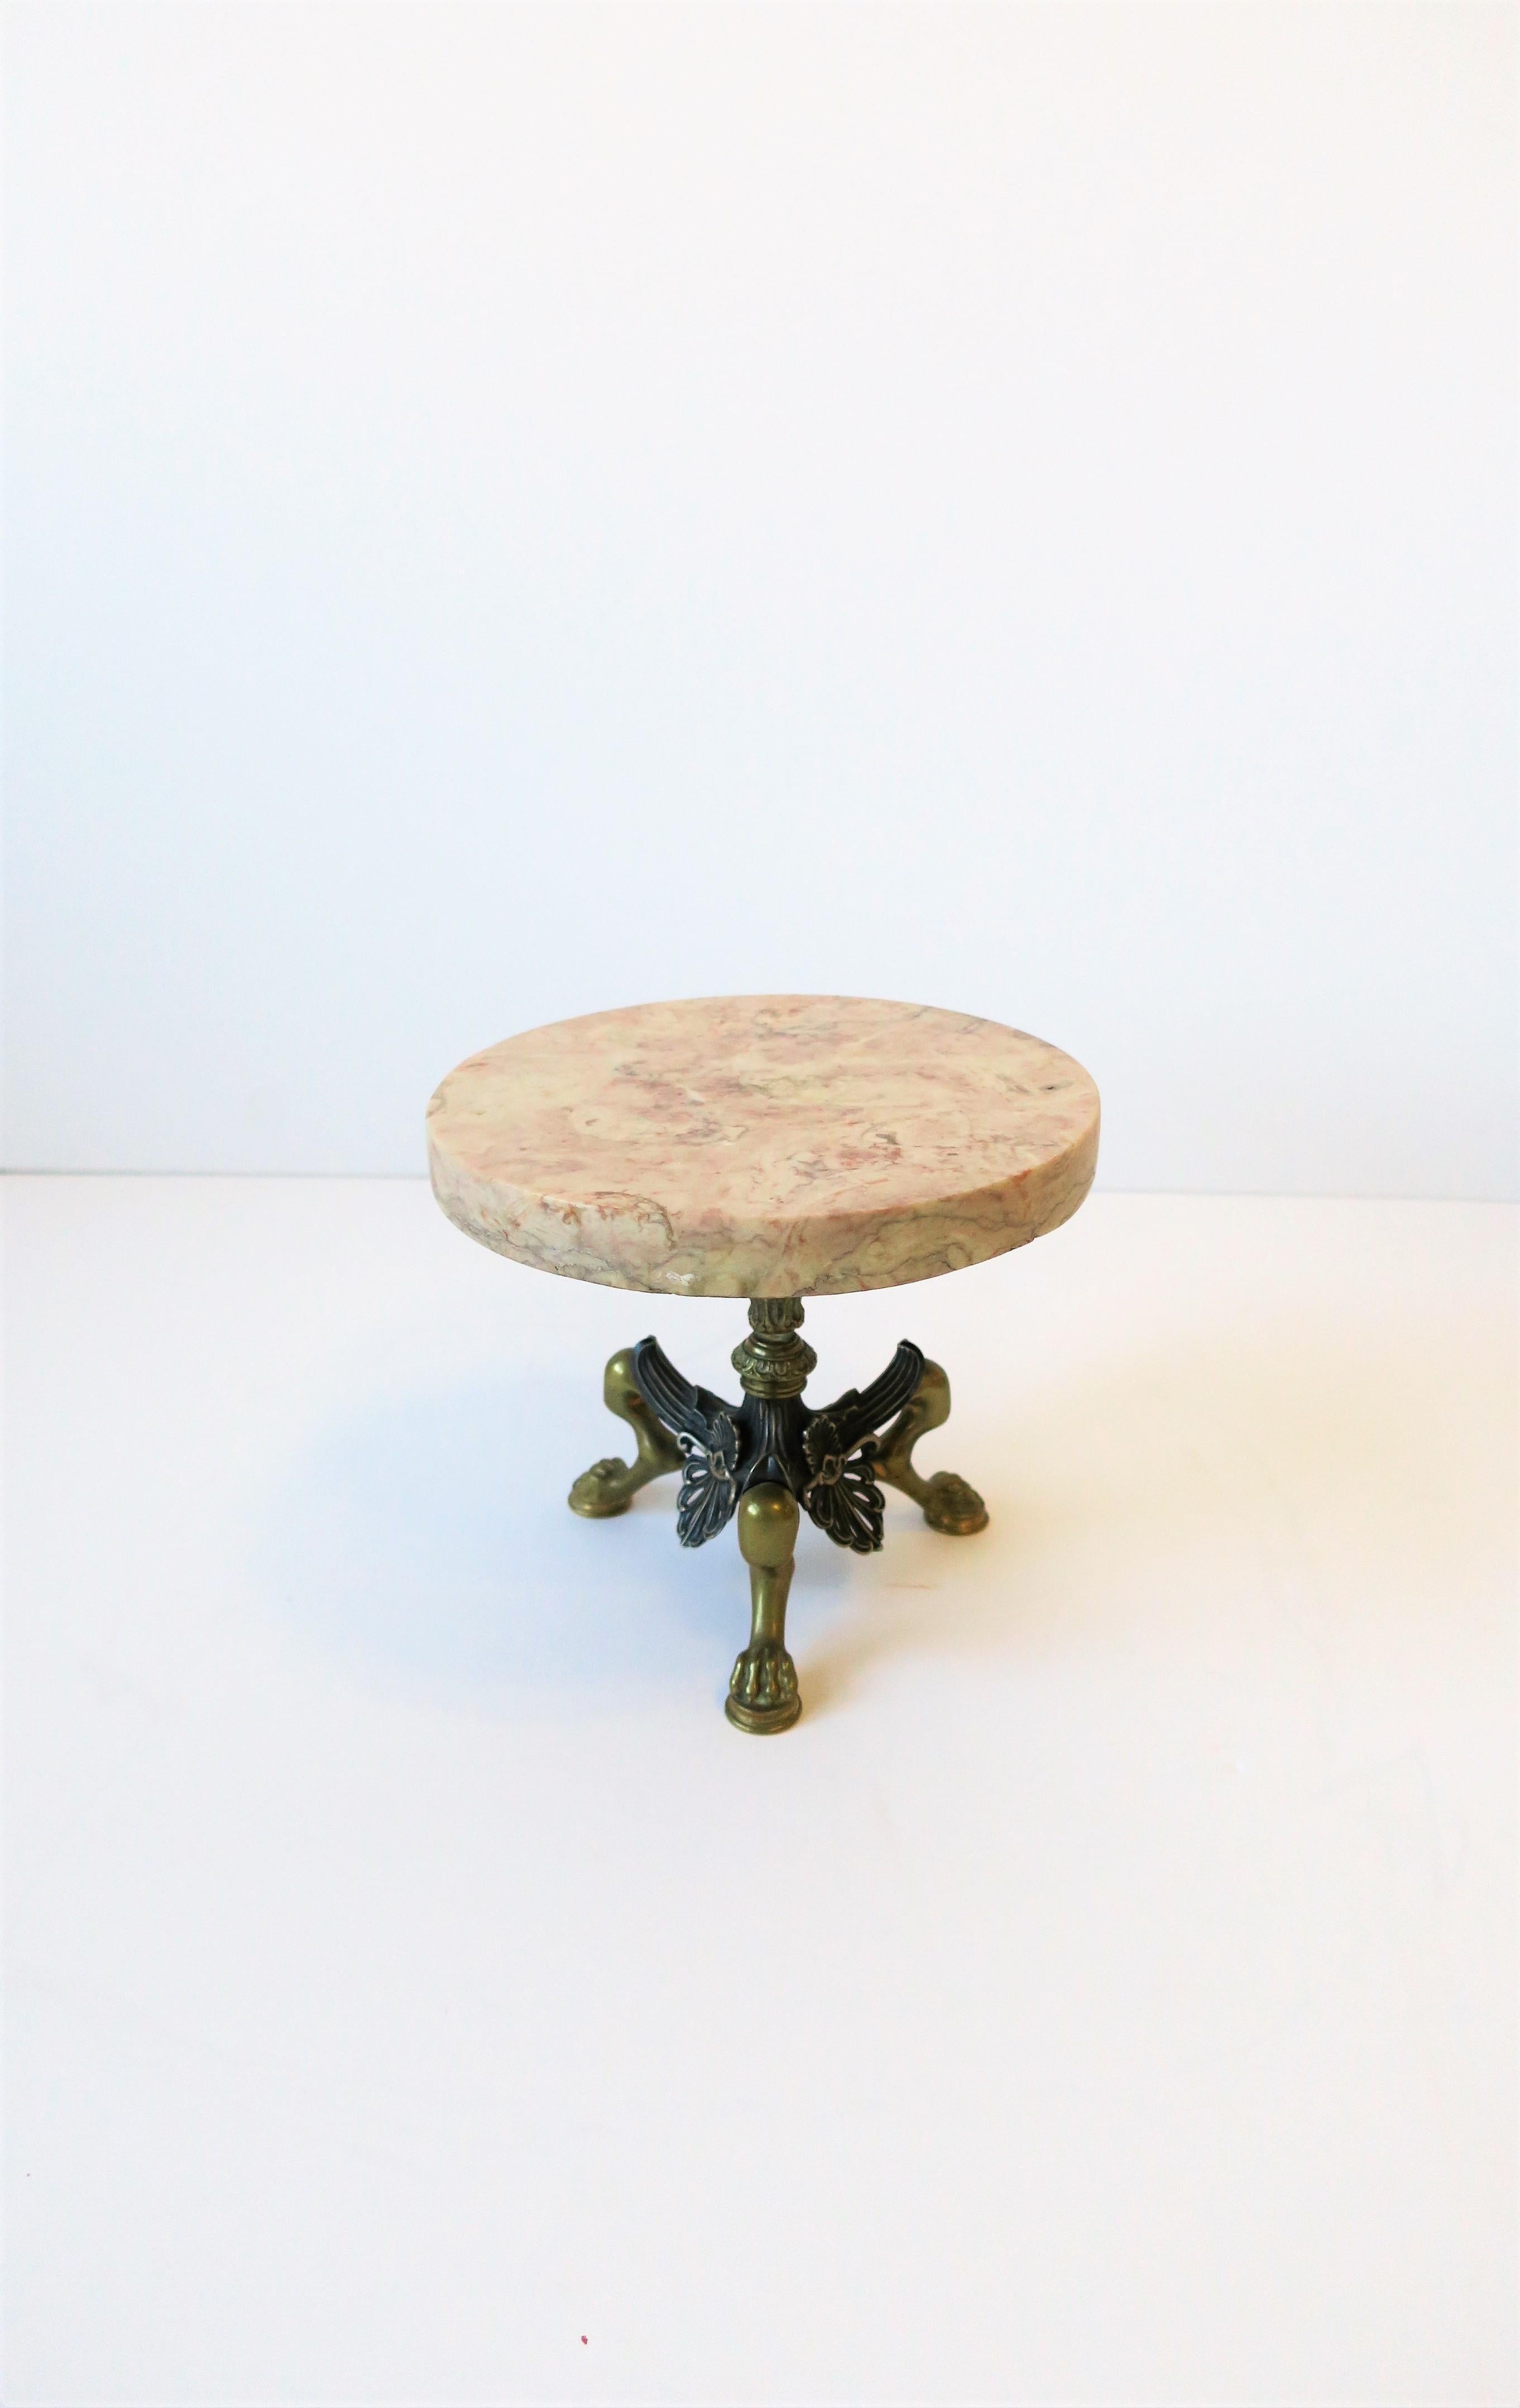 A substantial European round marble and brass pedestal with Lion paw feet base in the Regency style, circa 20th century, Europe. Images #5 and 6 show size comparison. Marble top is a combination of neutral hues and measures almost 1